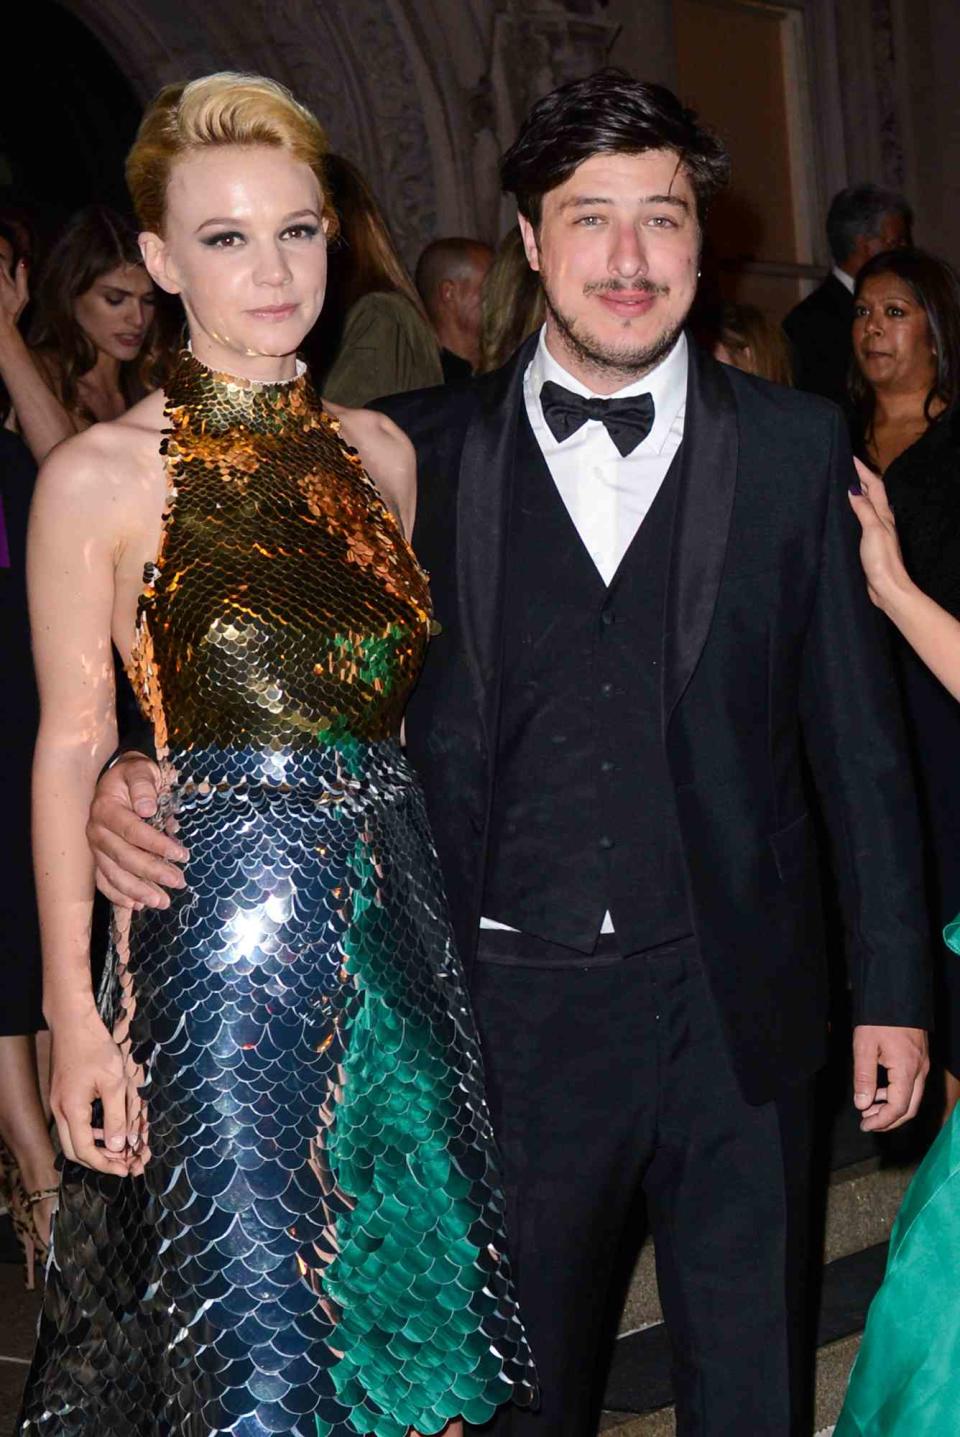 Carey Mulligan (L) and singer Marcus Mumford leave an after party at the Ukrainian Institute of America on May 7, 2012 in New York City